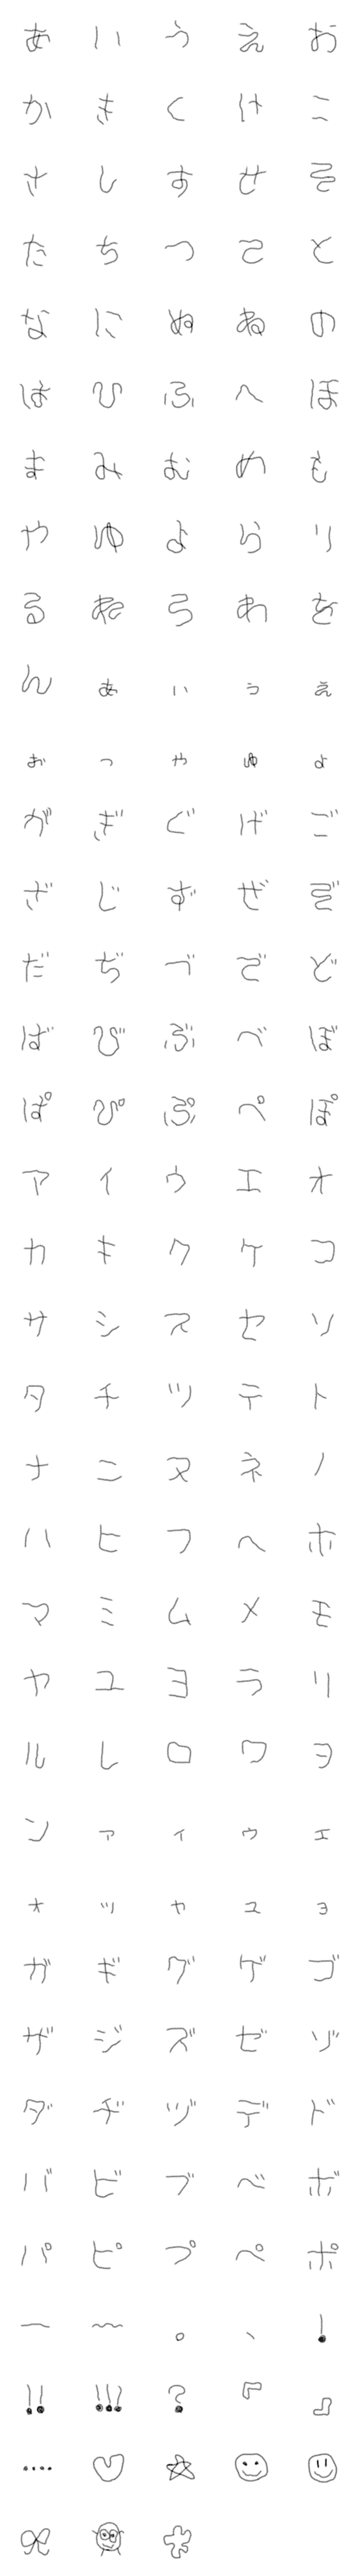 [LINE絵文字]鉛筆 こどもの字の画像一覧